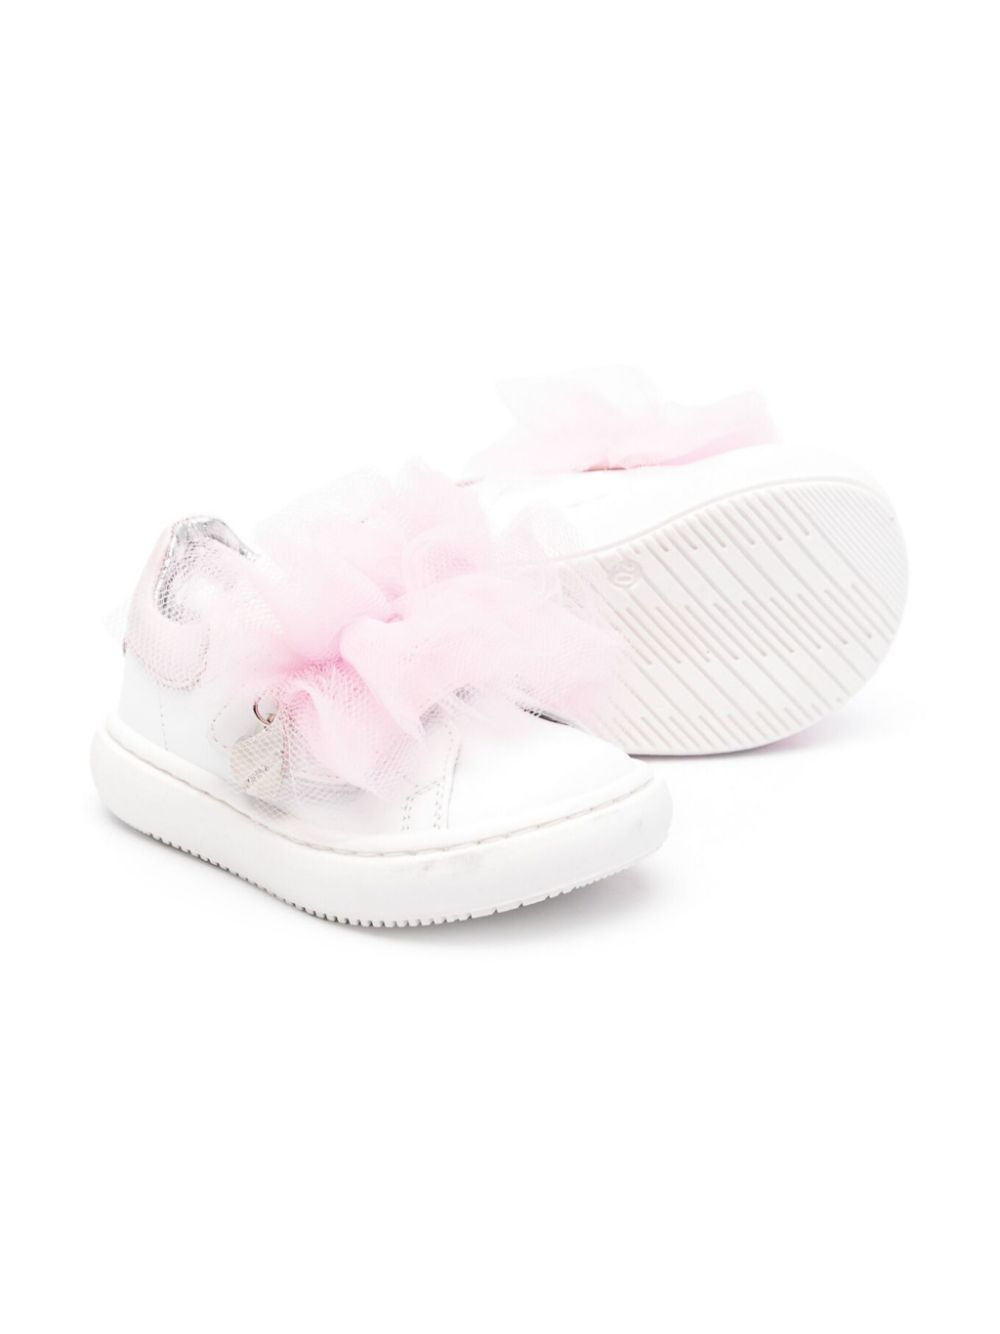 Sneakers bianche con tulle a contrasto